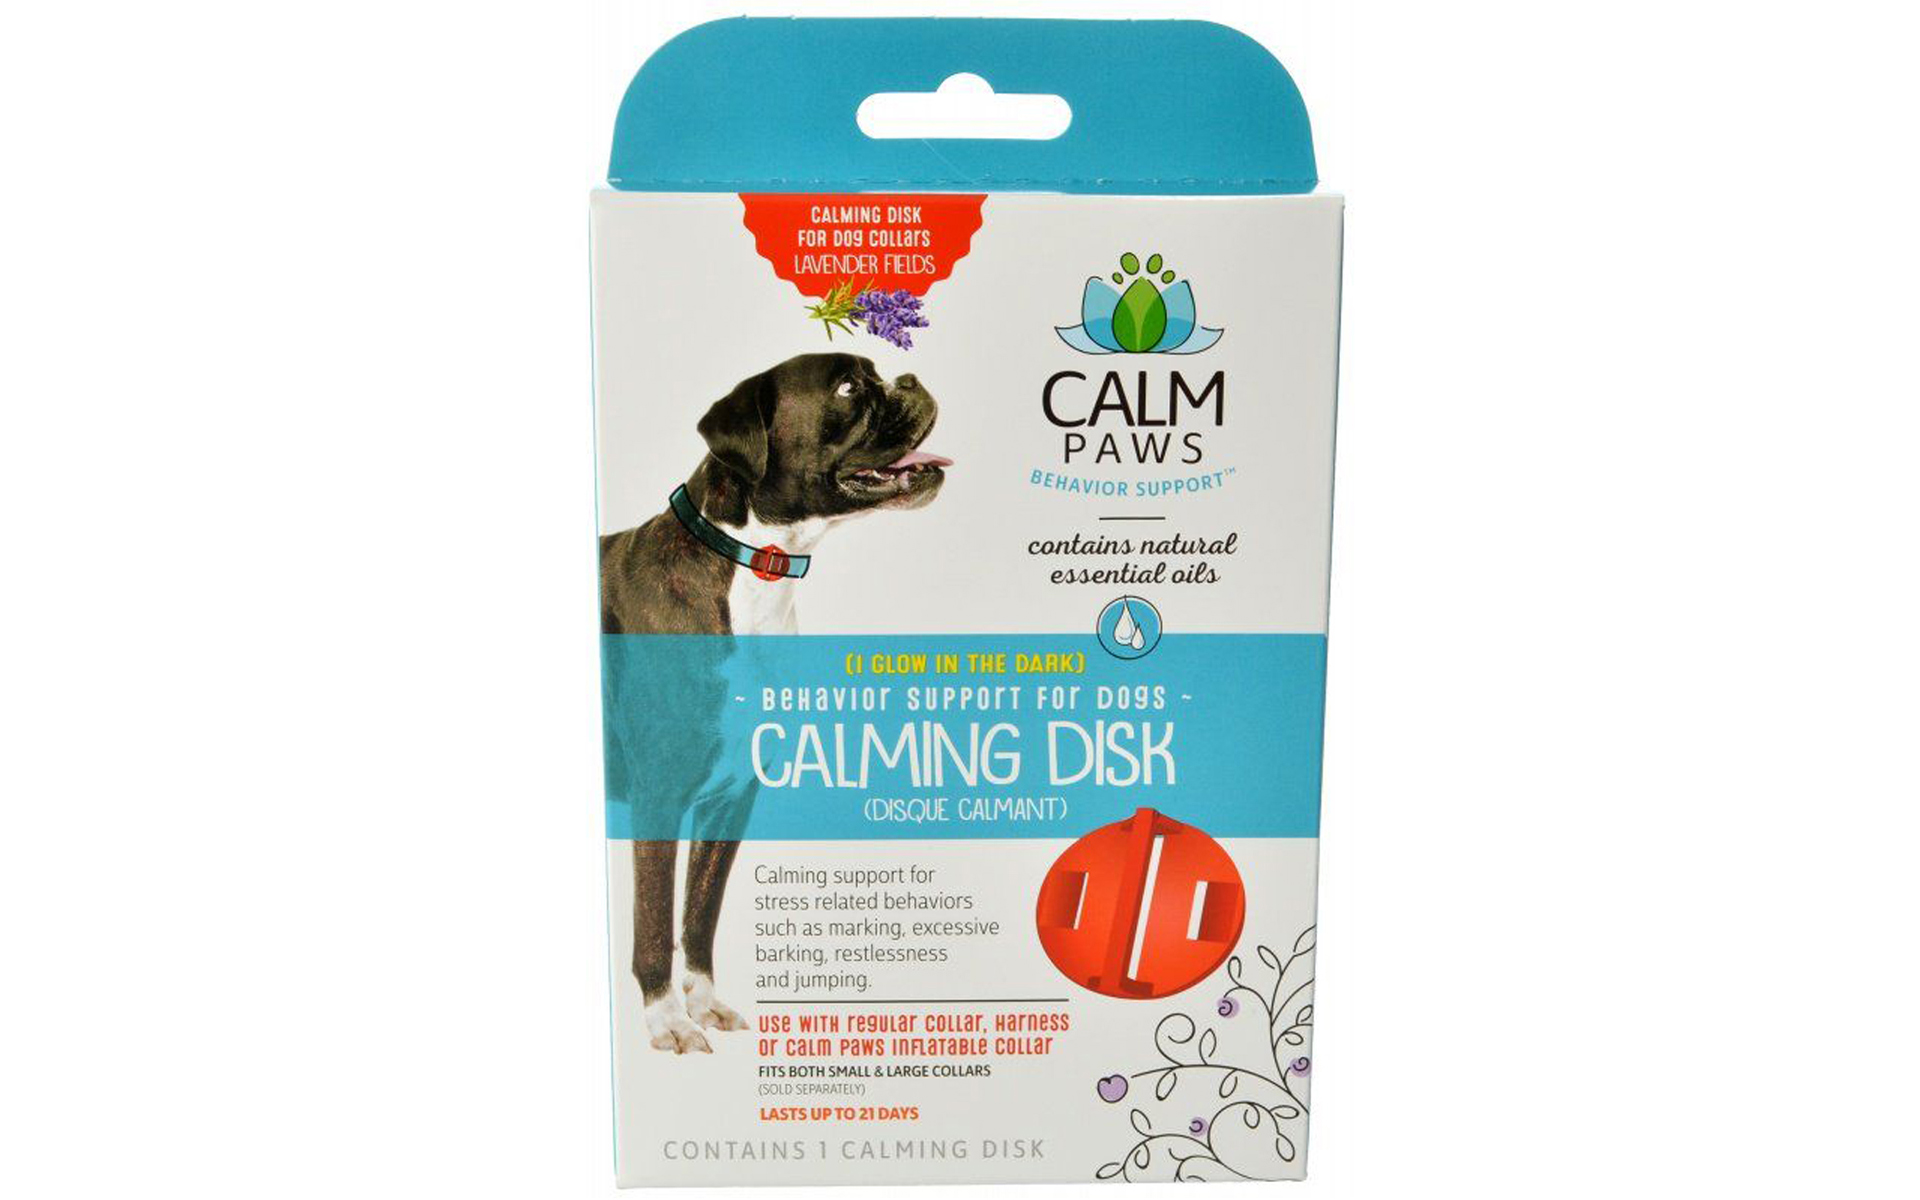 Calming Disk for Dog Collars, 1 Count